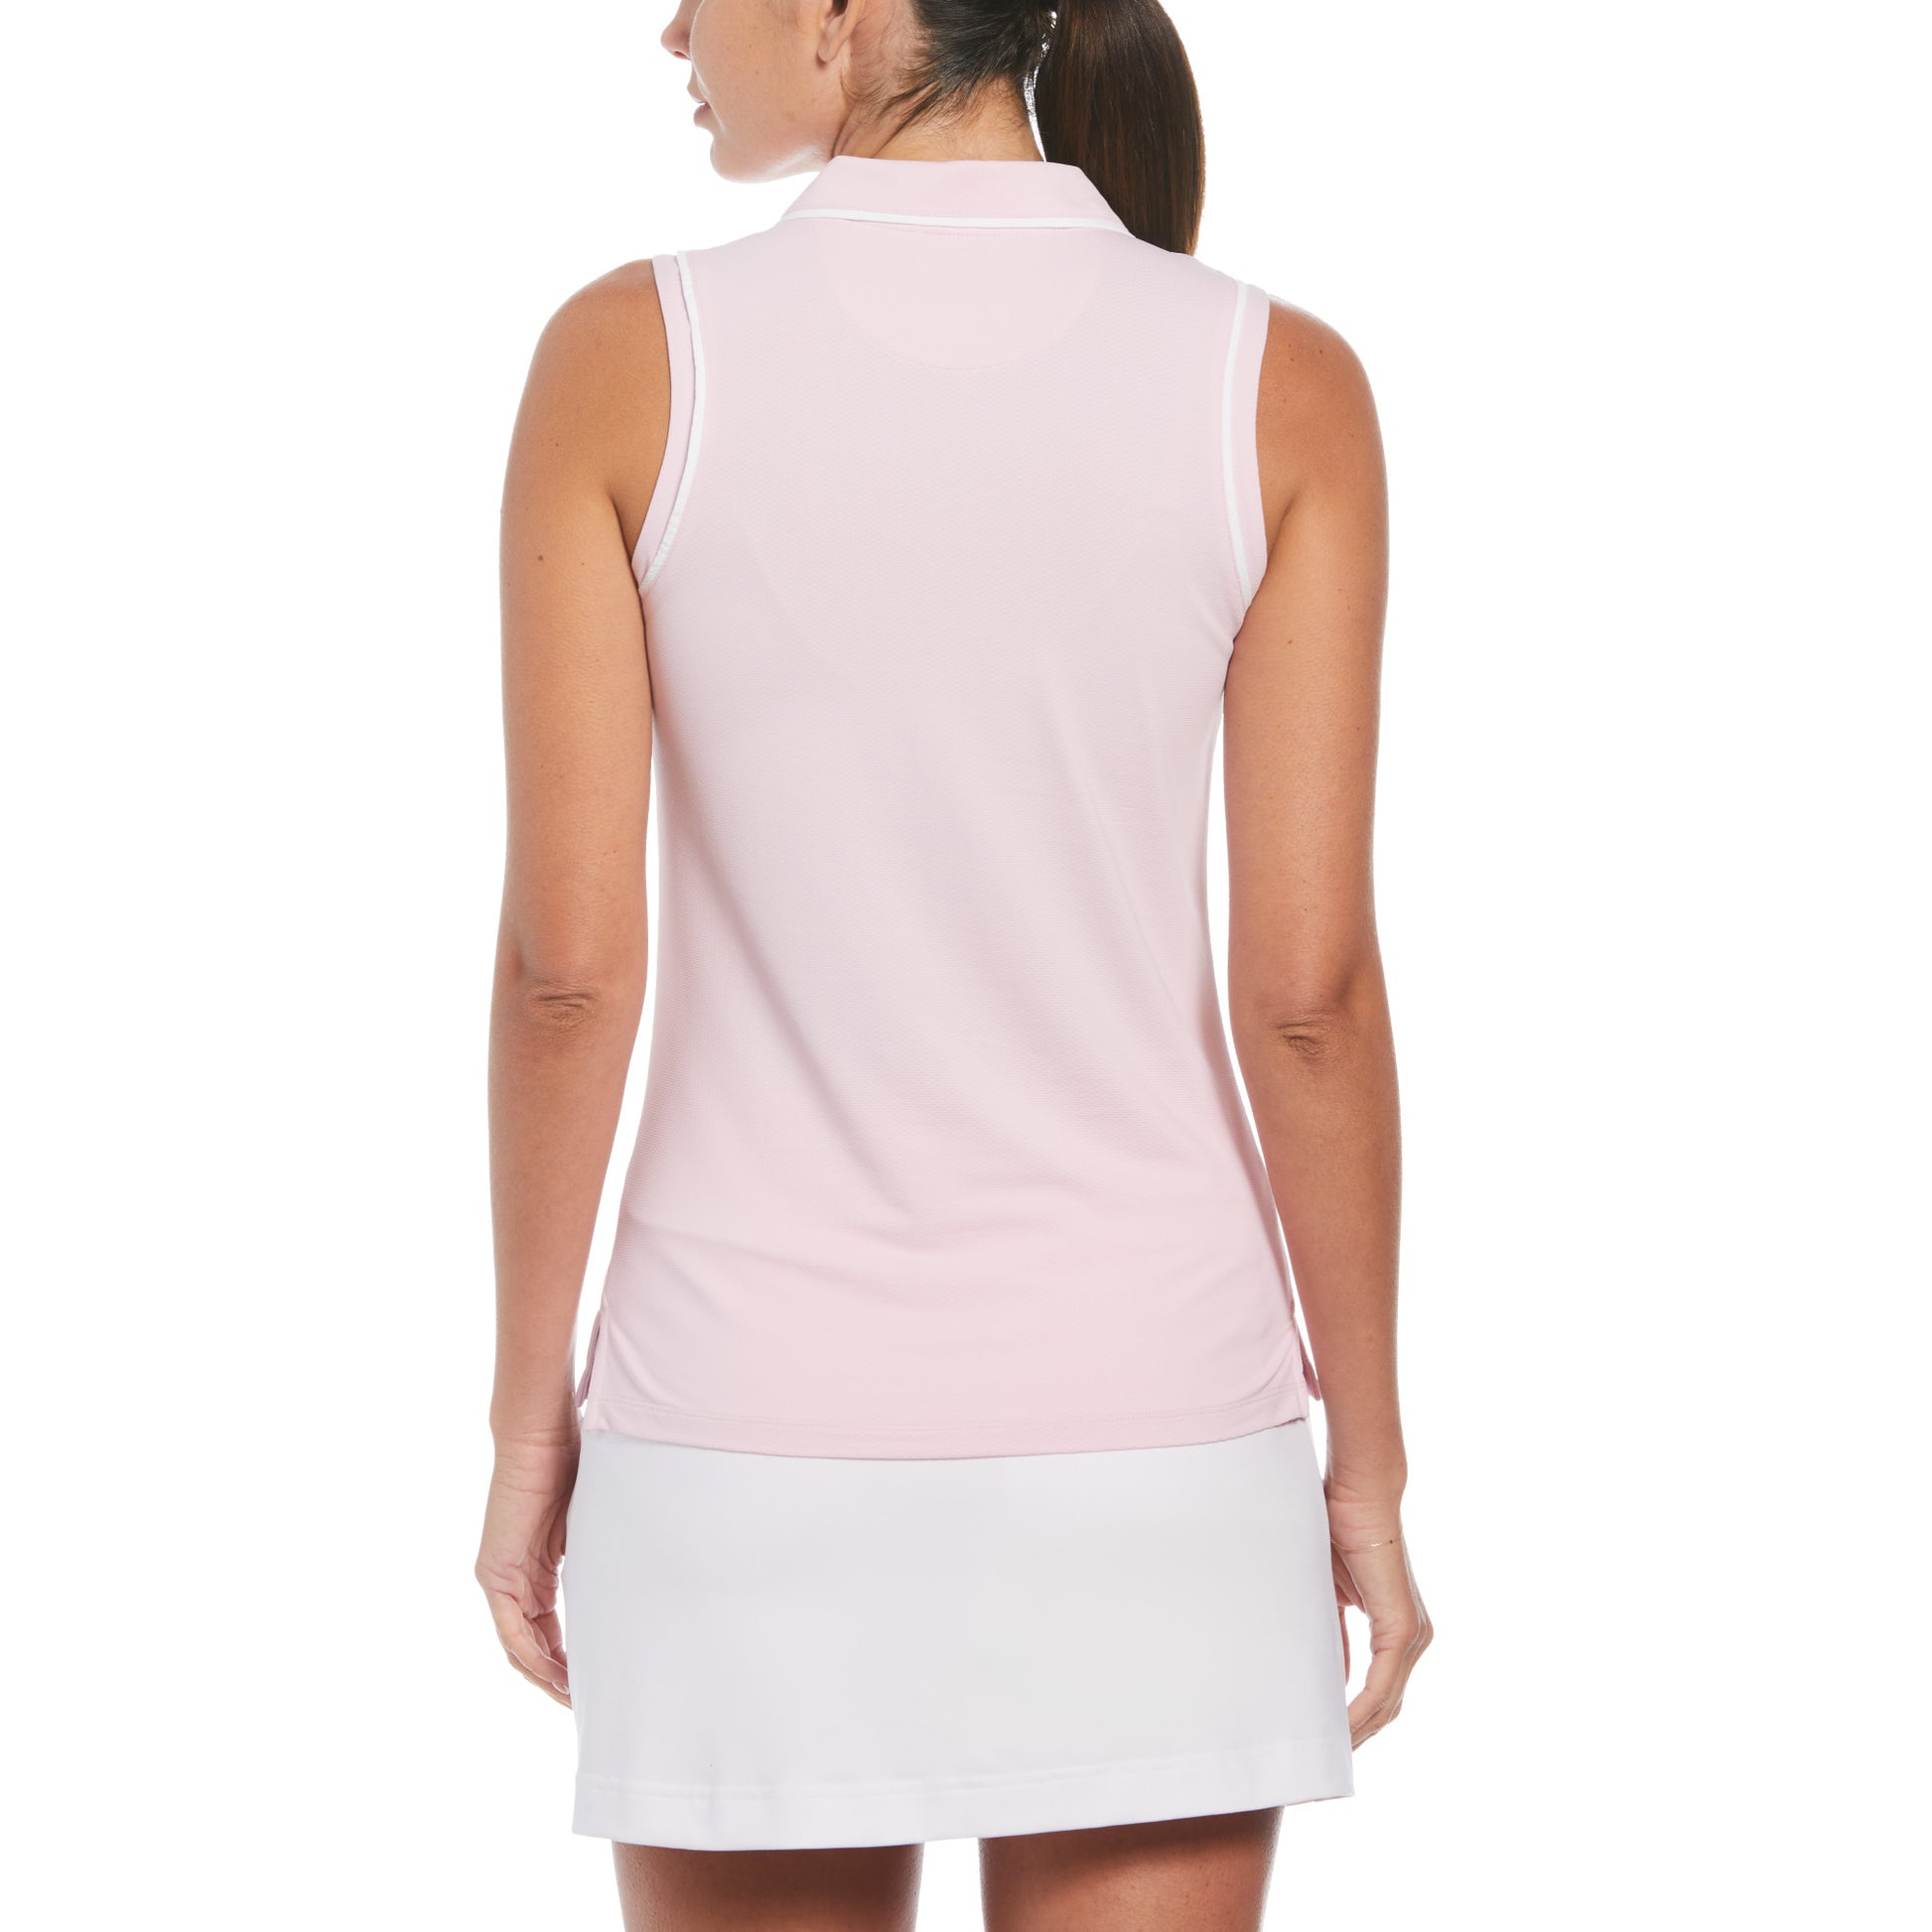 Original Penguin Womens Sleeveless Polo in Gelato Pink with Contrast Piping